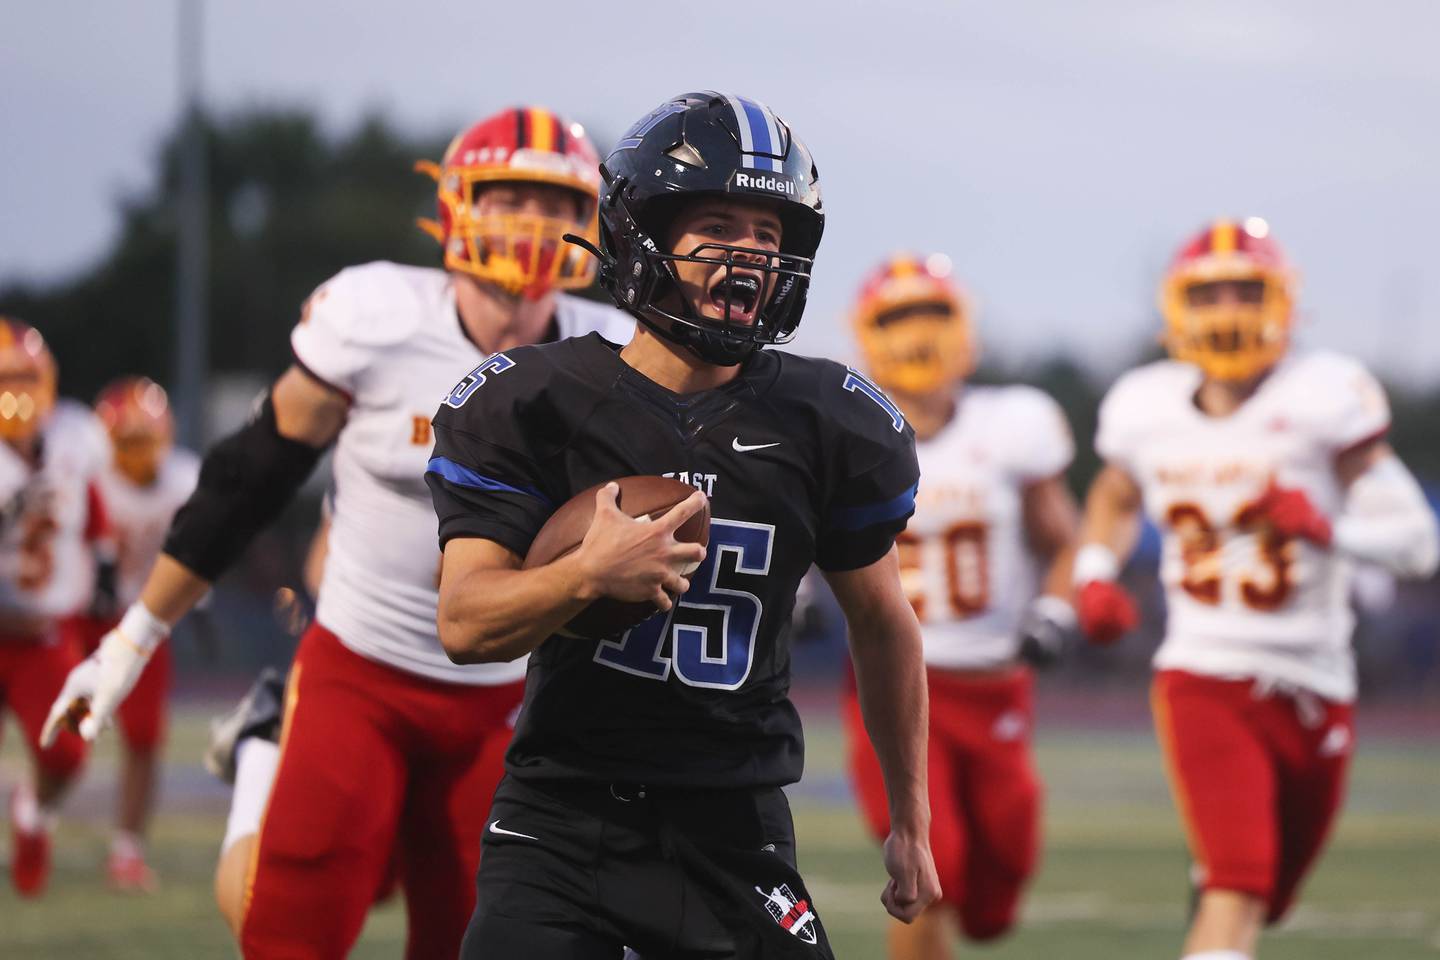 Lincoln-Way East’s quarterback Braden Tischer scores uncontested on a 55 yard run against Batavia. Friday, Sept. 2, 2022, in Frankfort.